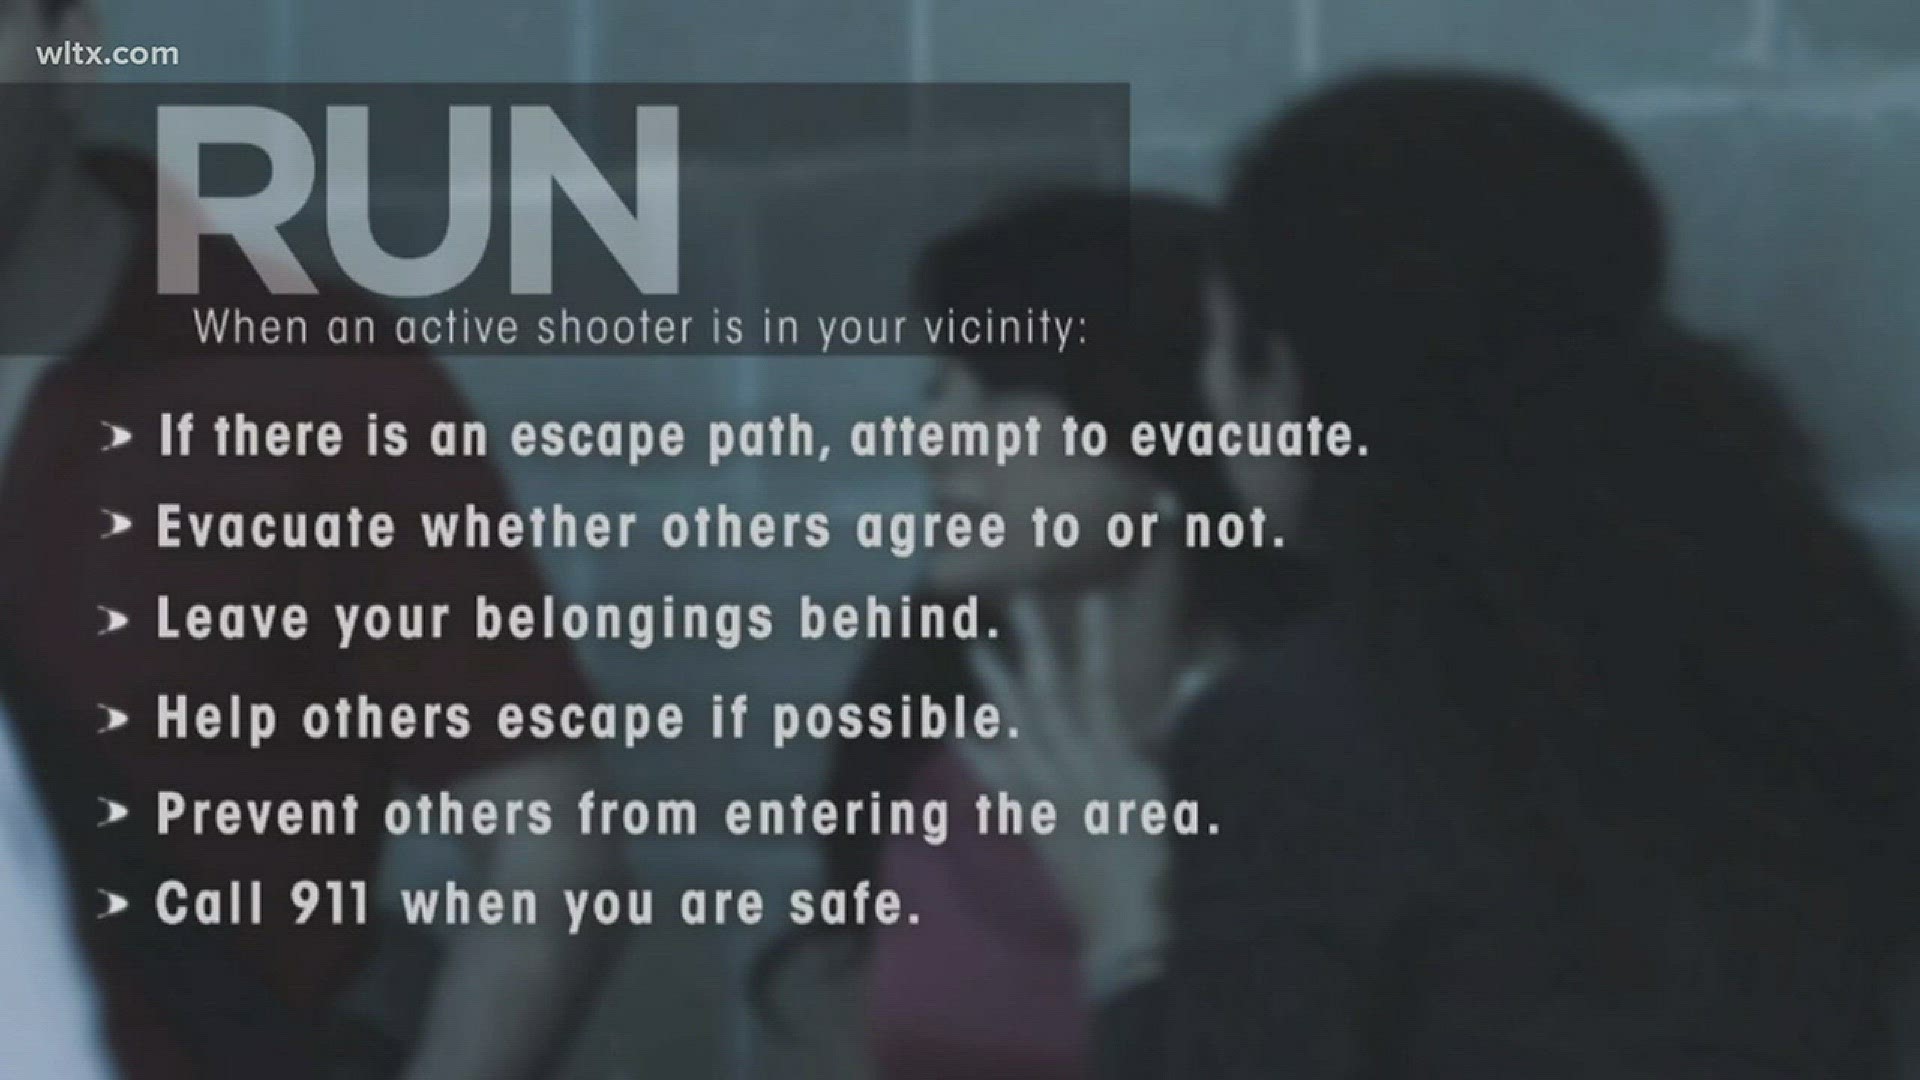 FBI video outlines how people should react should they find themselves in an active shooter situation.